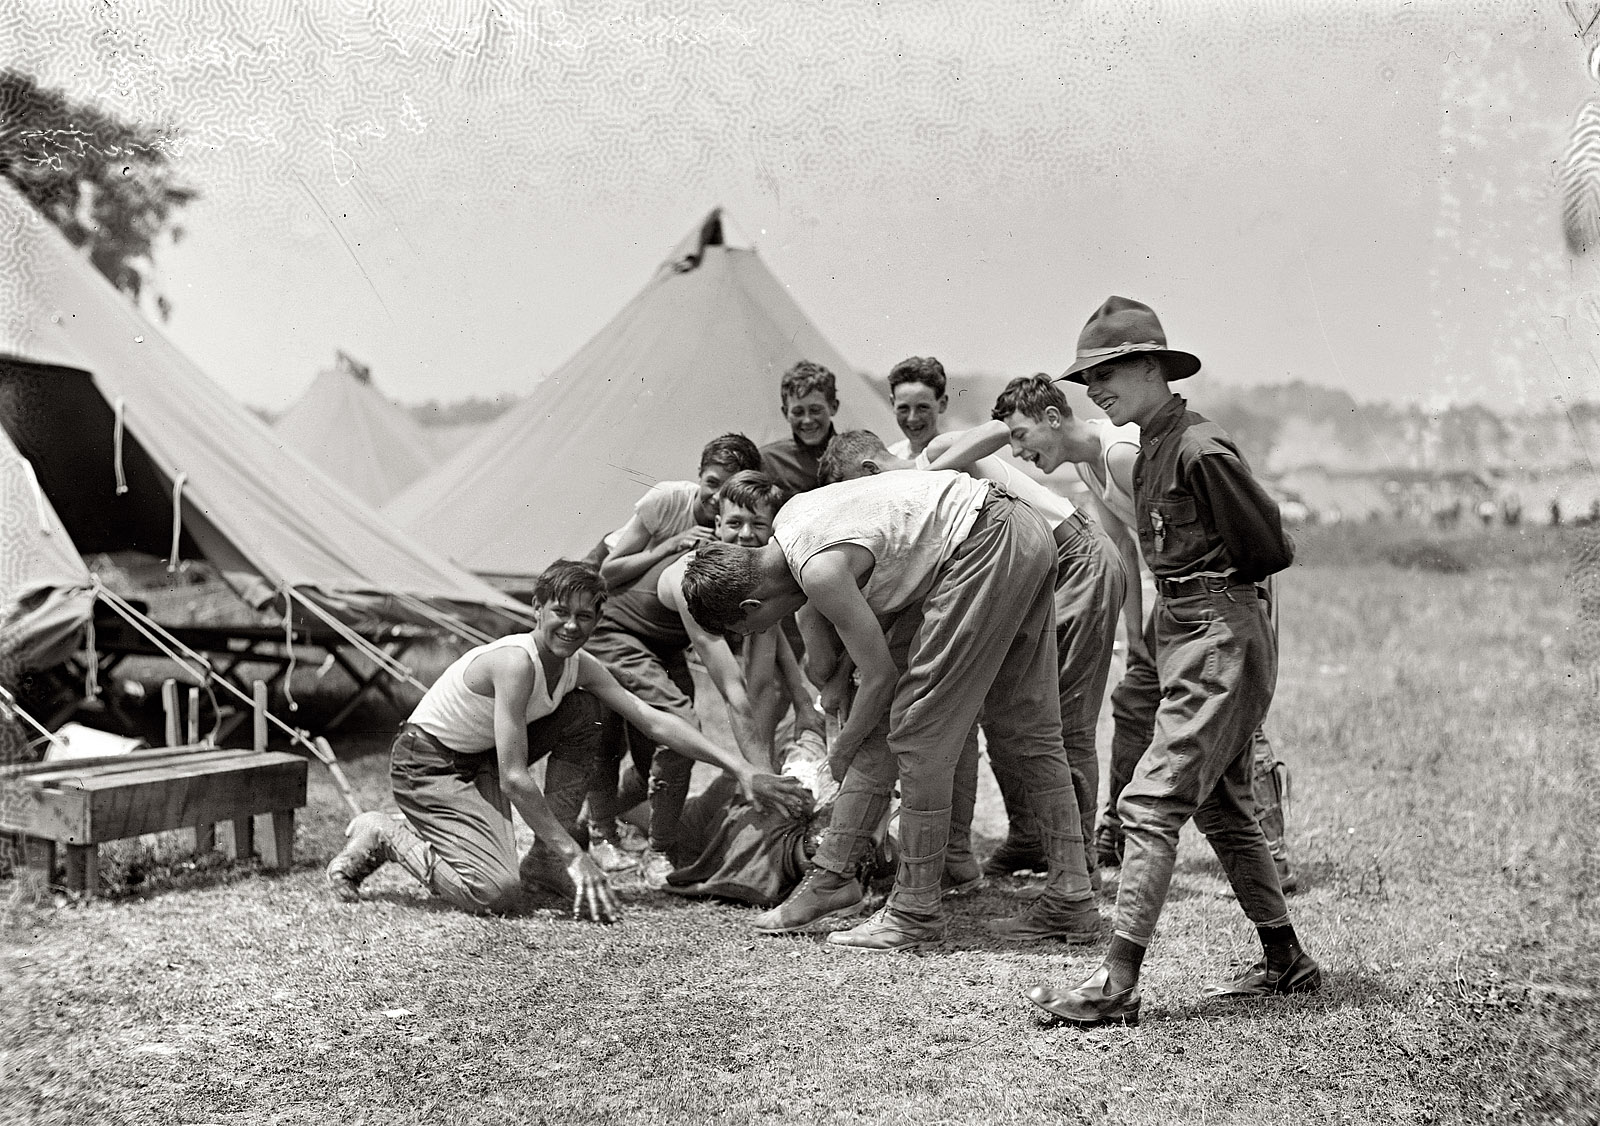 Boy Scouts at Gettysburg circa 1913 performing the time-honored camp ritual of water bucket to the head. View full size. George Grantham Bain Collection.